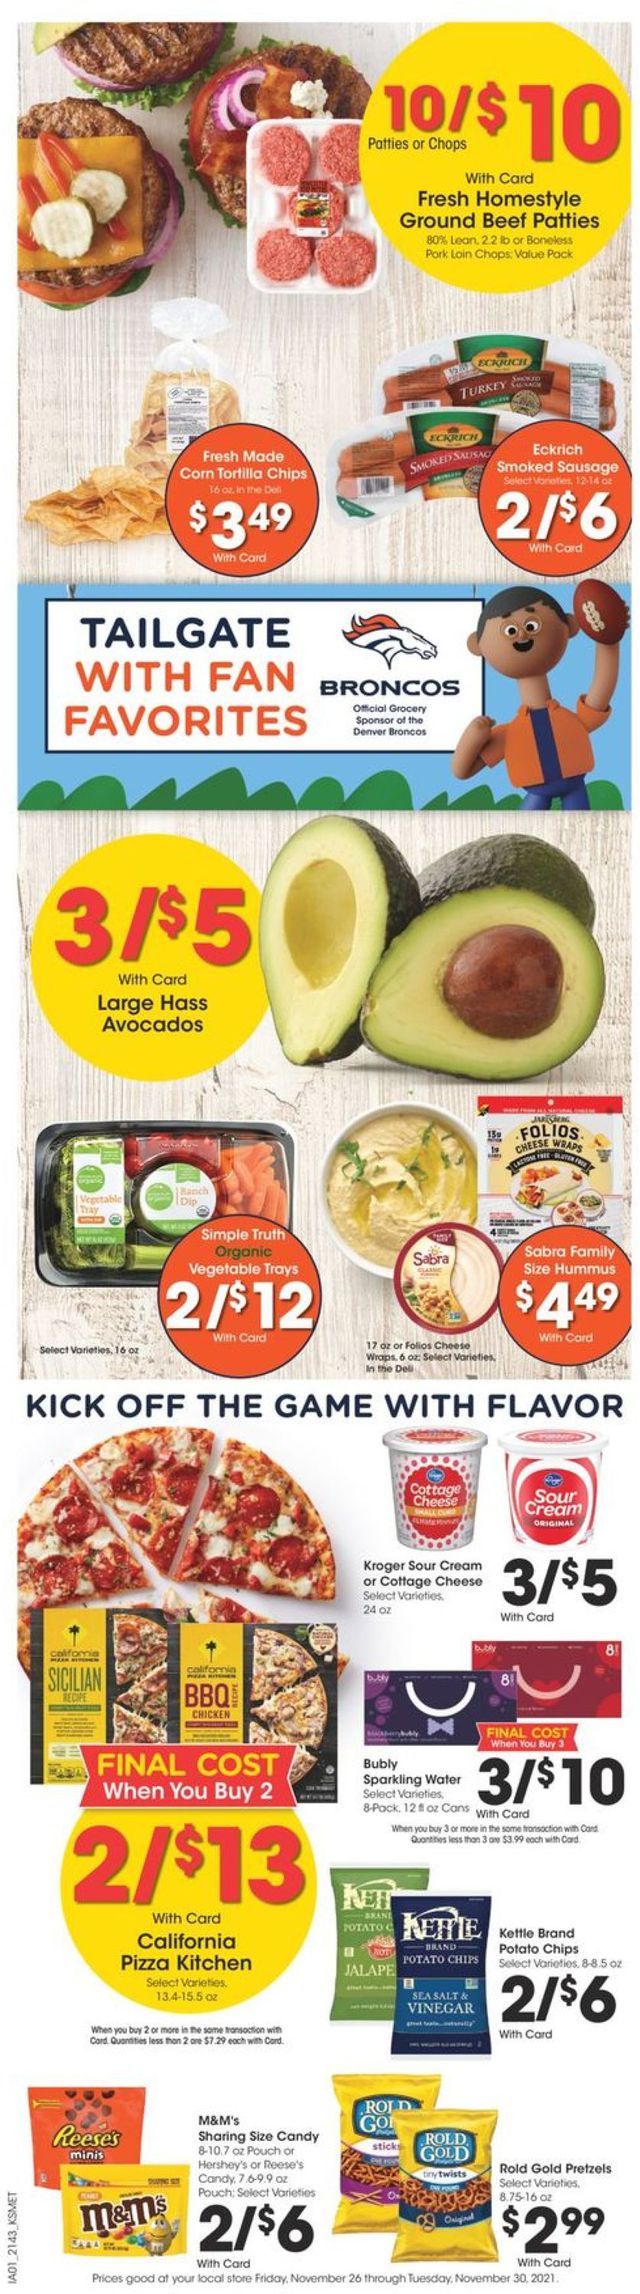 King Soopers Ad from 11/26/2021